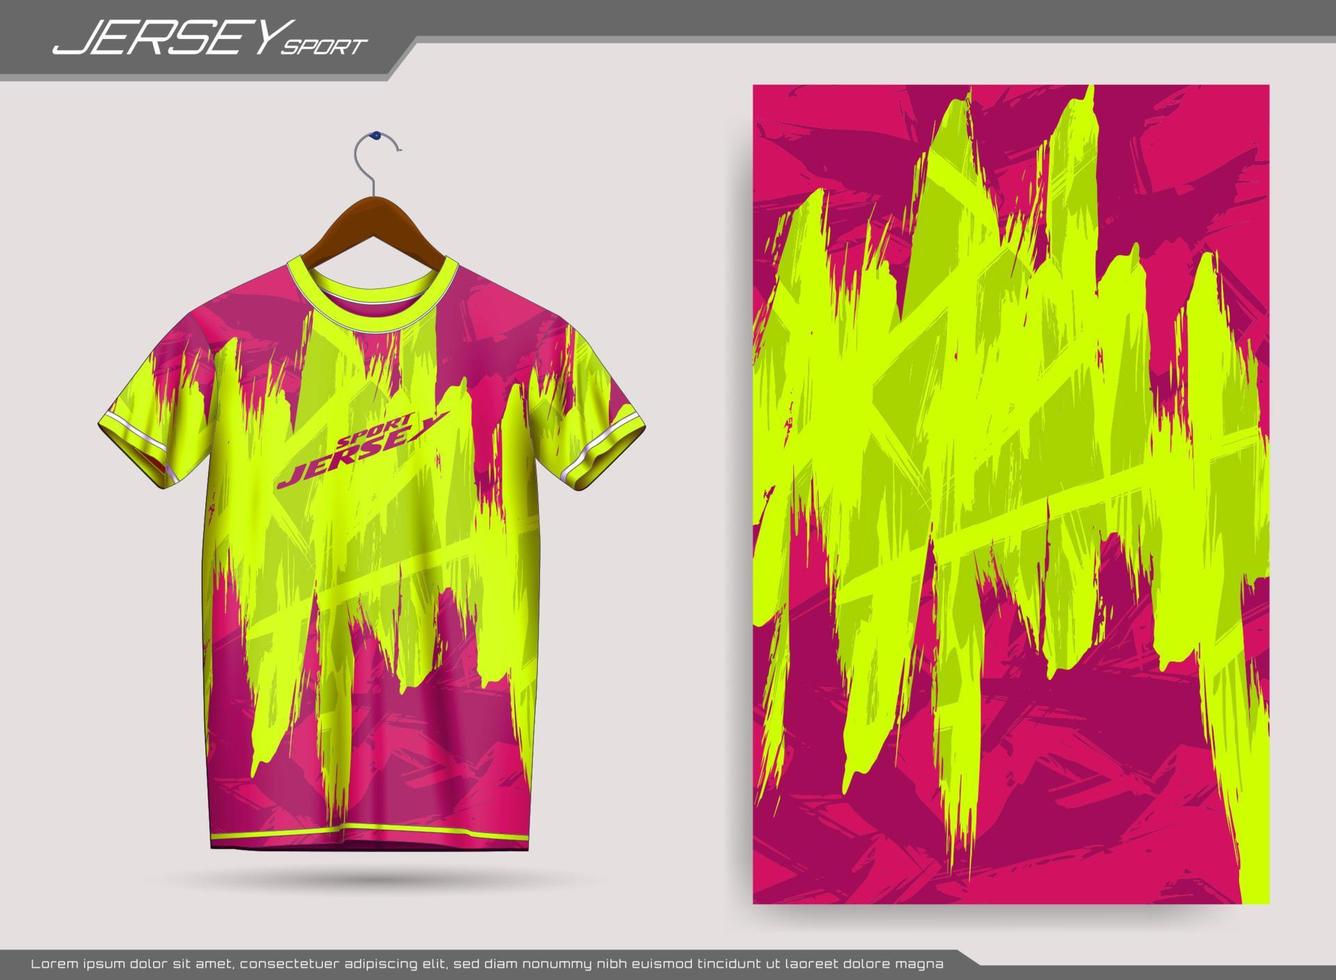 Jersey sports t-shirt. Soccer jersey mockup for soccer club. Suitable for jersey, background, poster, etc. vector